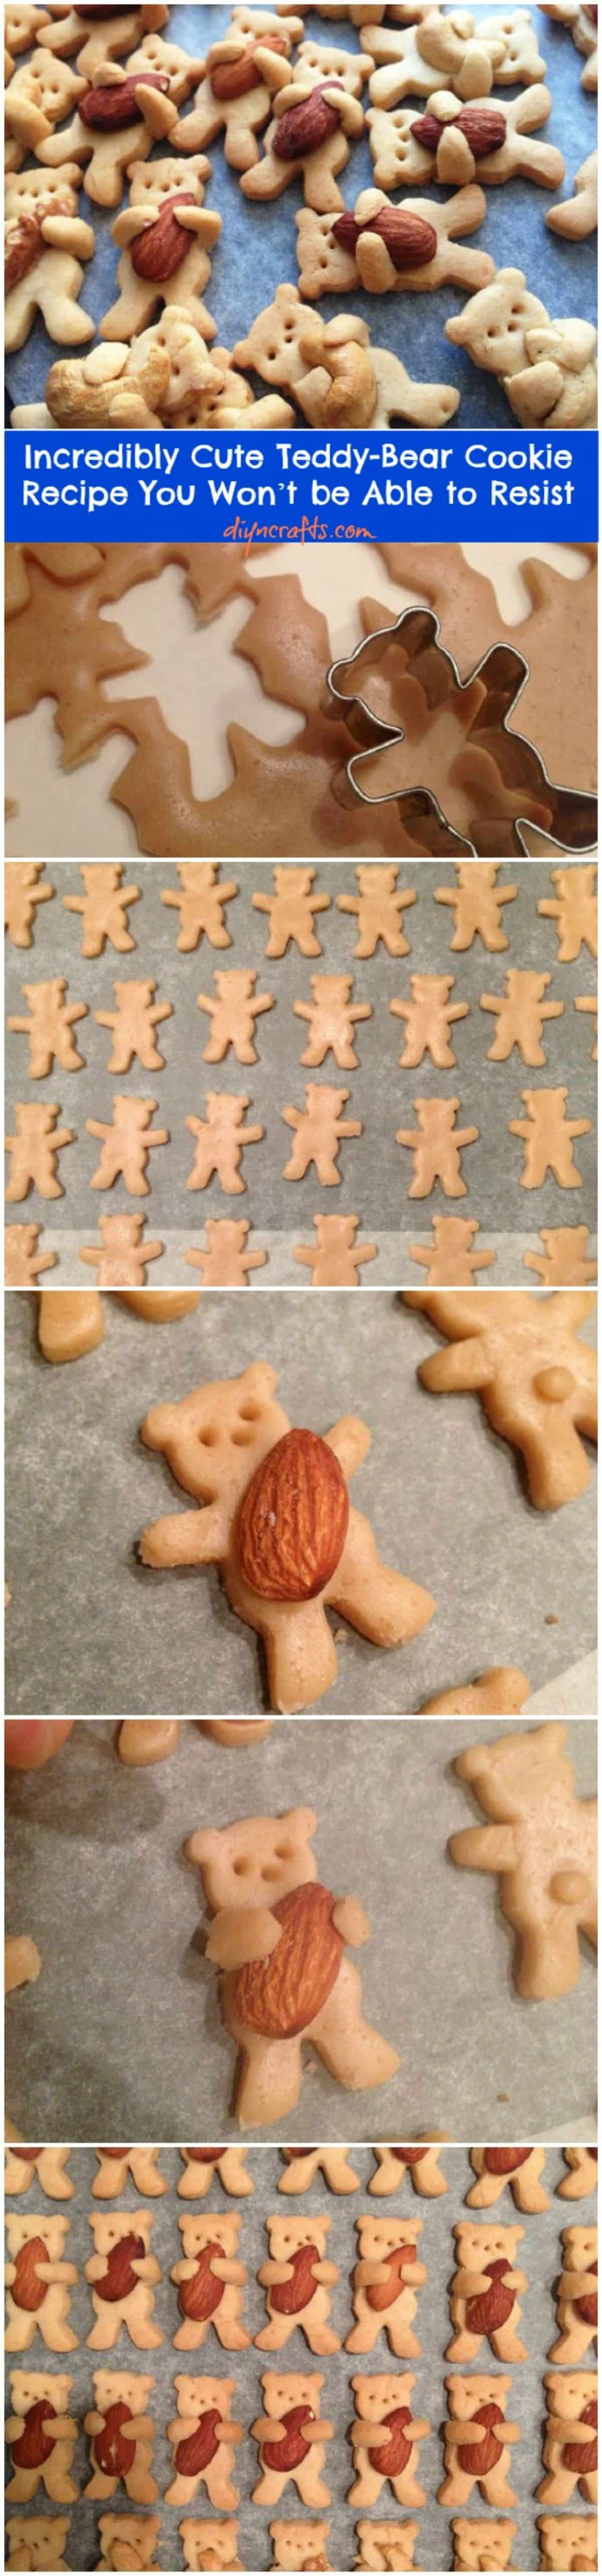 Incredibly Cute Teddy-Bear Cookie Recipe You Won’t be Able to Resist collage.